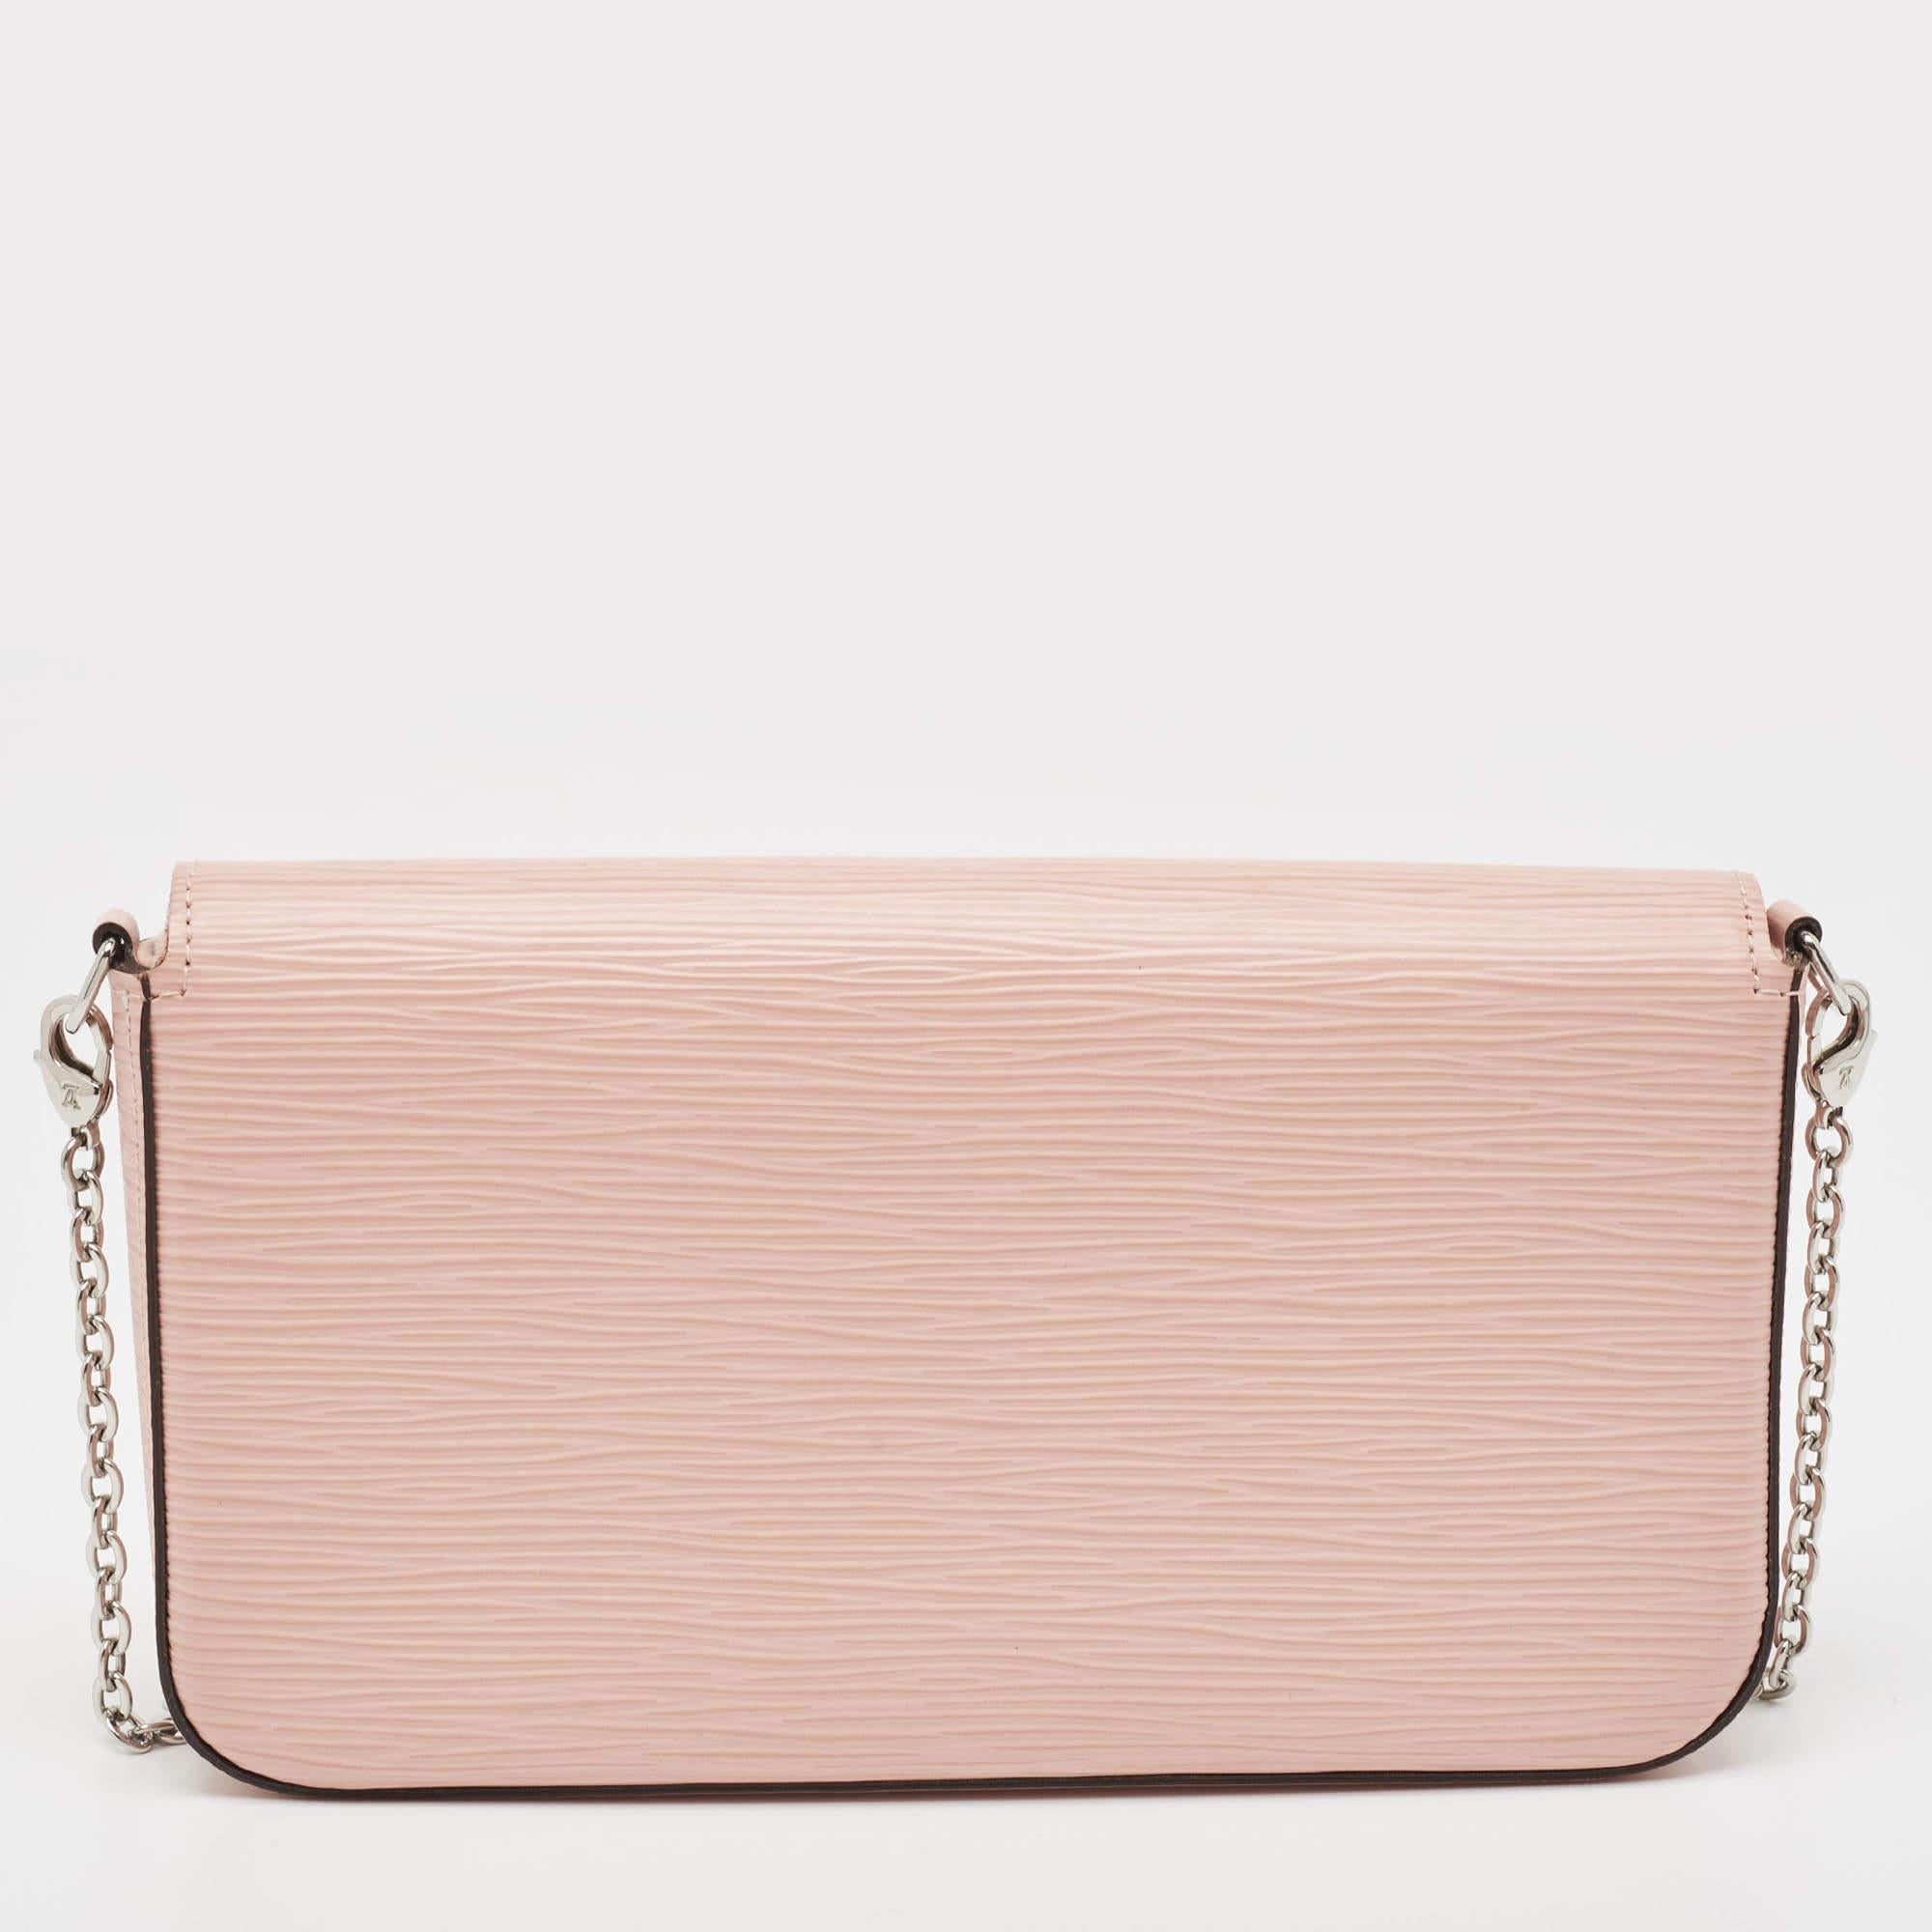 This Pochette Félicie has been designed to be a shoulder bag as well as a clutch. It is crafted from Rose Ballerine Epi leather and has an Alcantara-lined interior, an envelope flap, and a silver-tone chain. The bag comes in a convenient size that